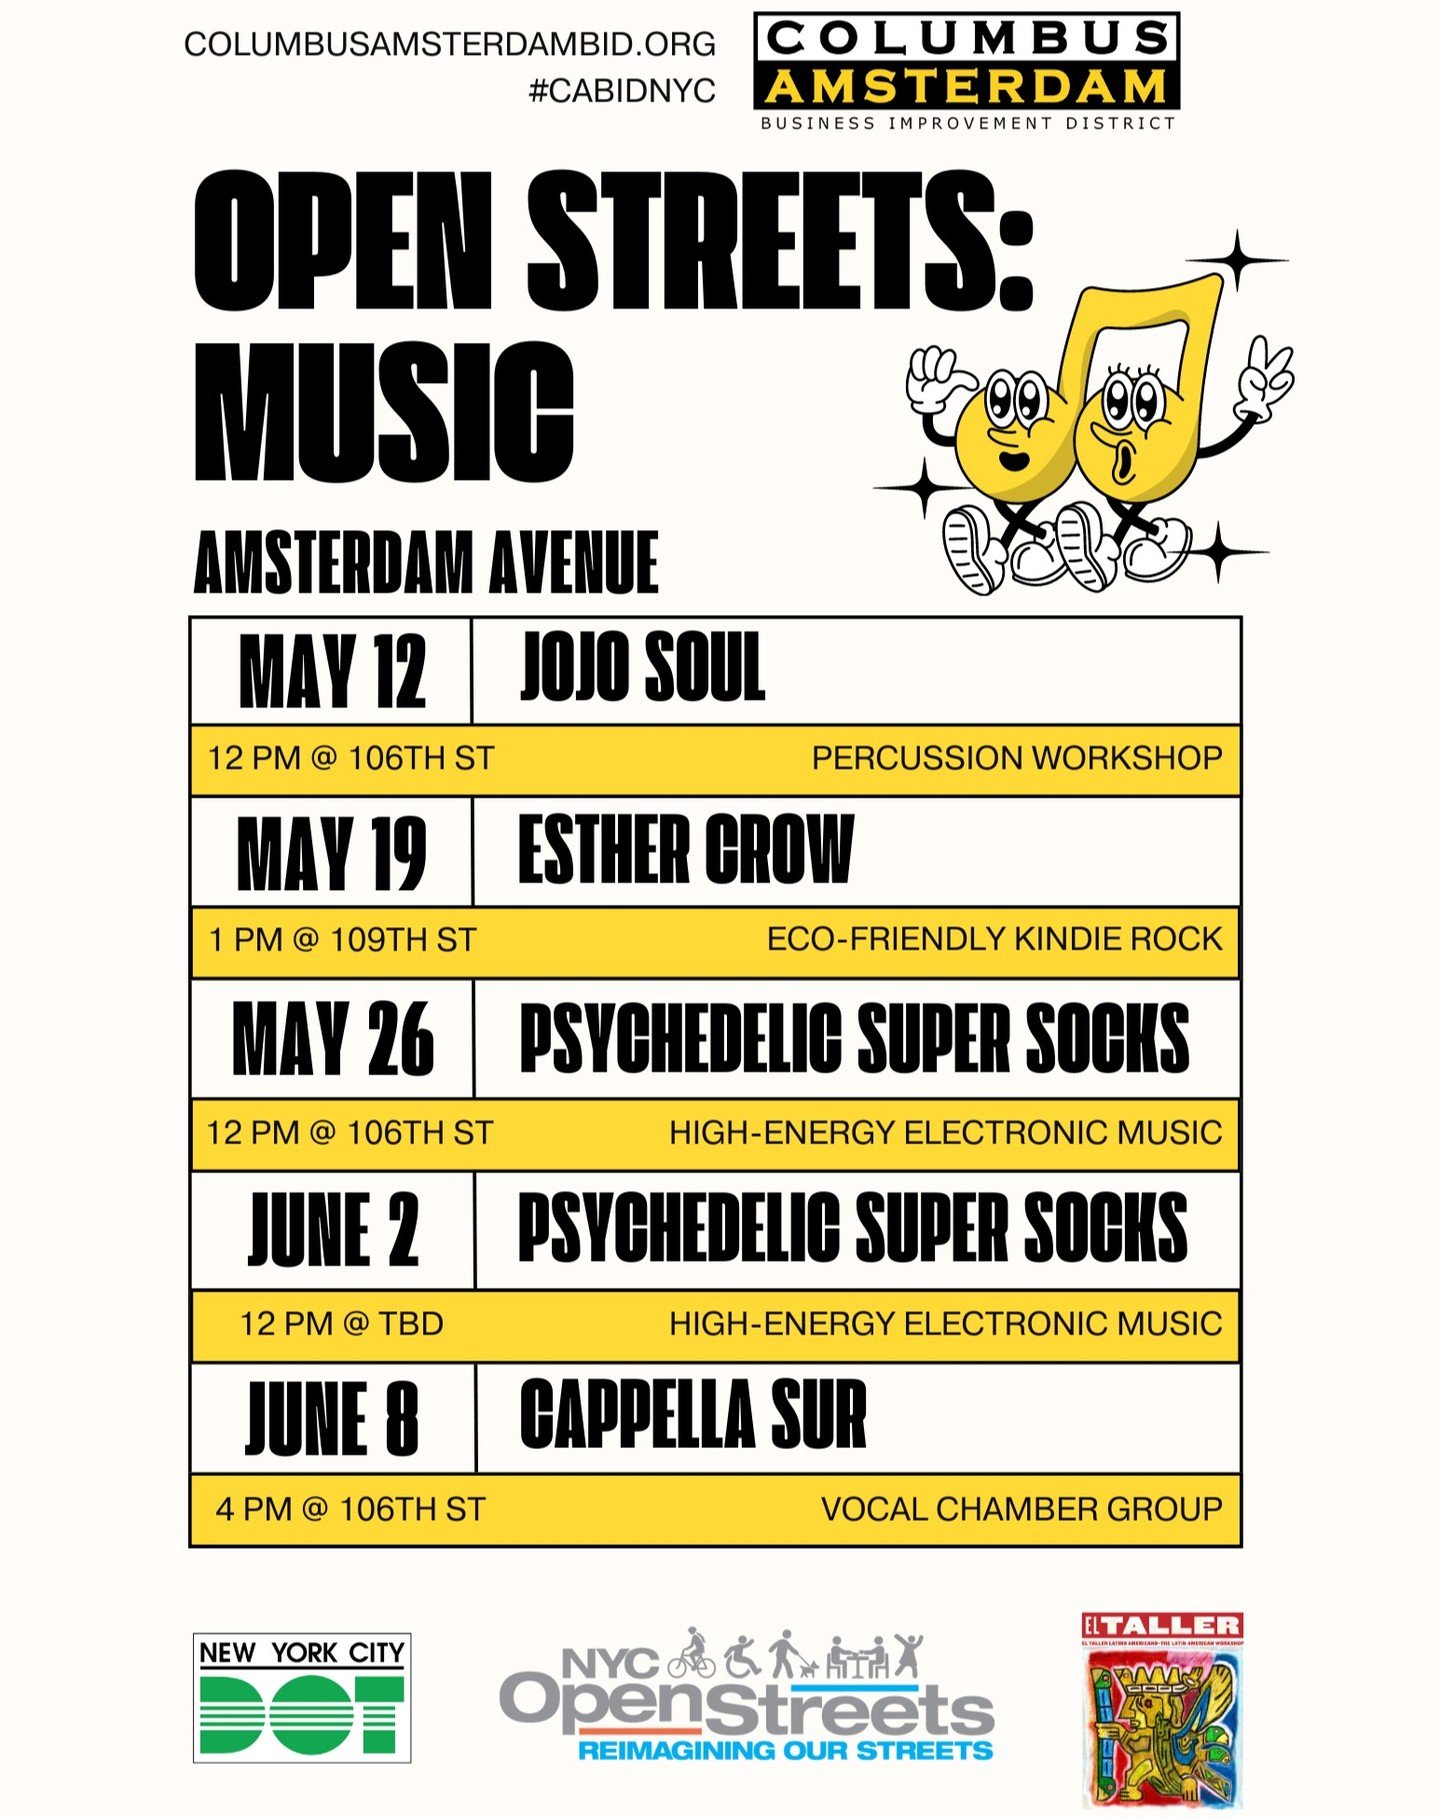 We are so excited to share the lineup for our next month of performances on Open Streets! It has been amazing to connect with local musicians and partner with our longtime neighbor, El Taller Latino, to put these events together. Come out and enjoy t